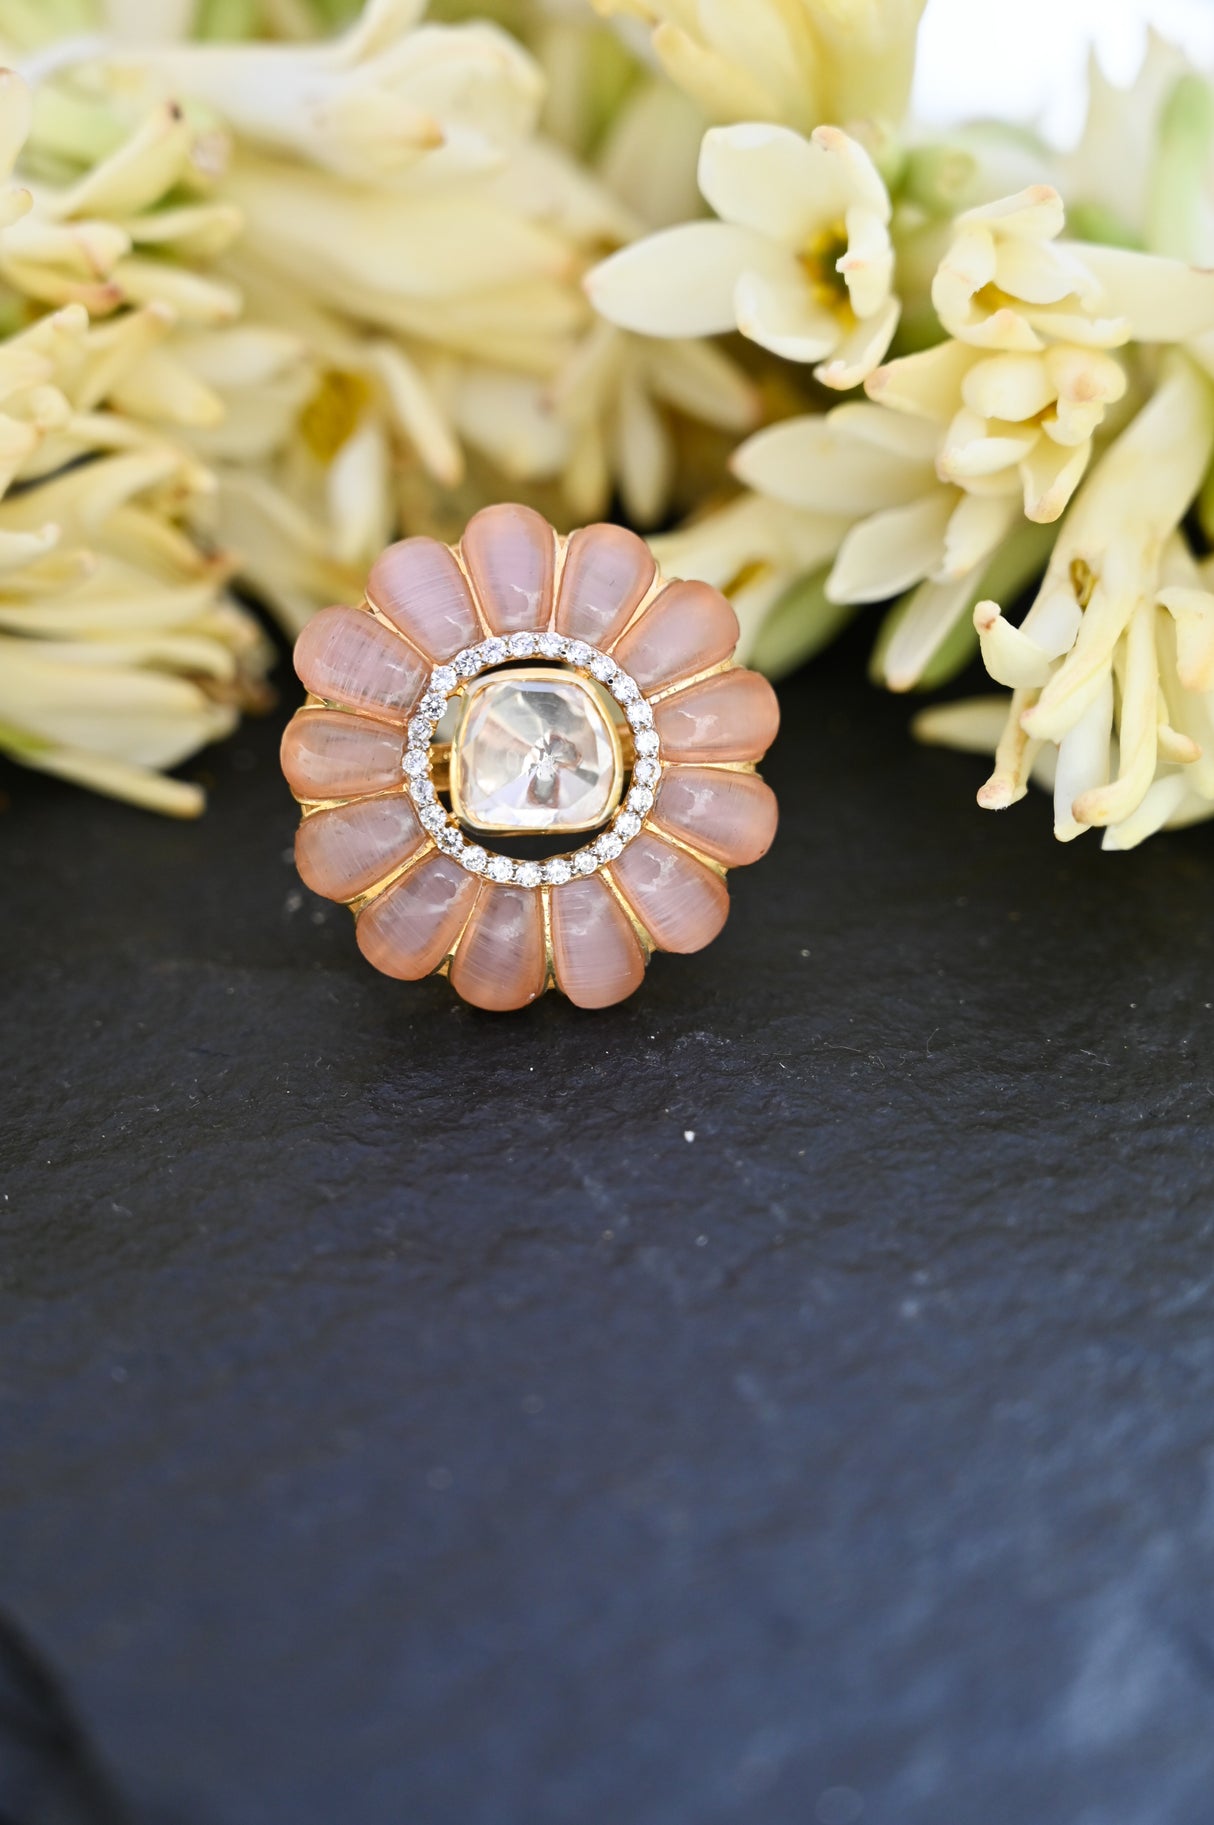 Handcrafted Adjustable 92.5 Silver Ring with Moissanite polki and Imitation Rose Quartz